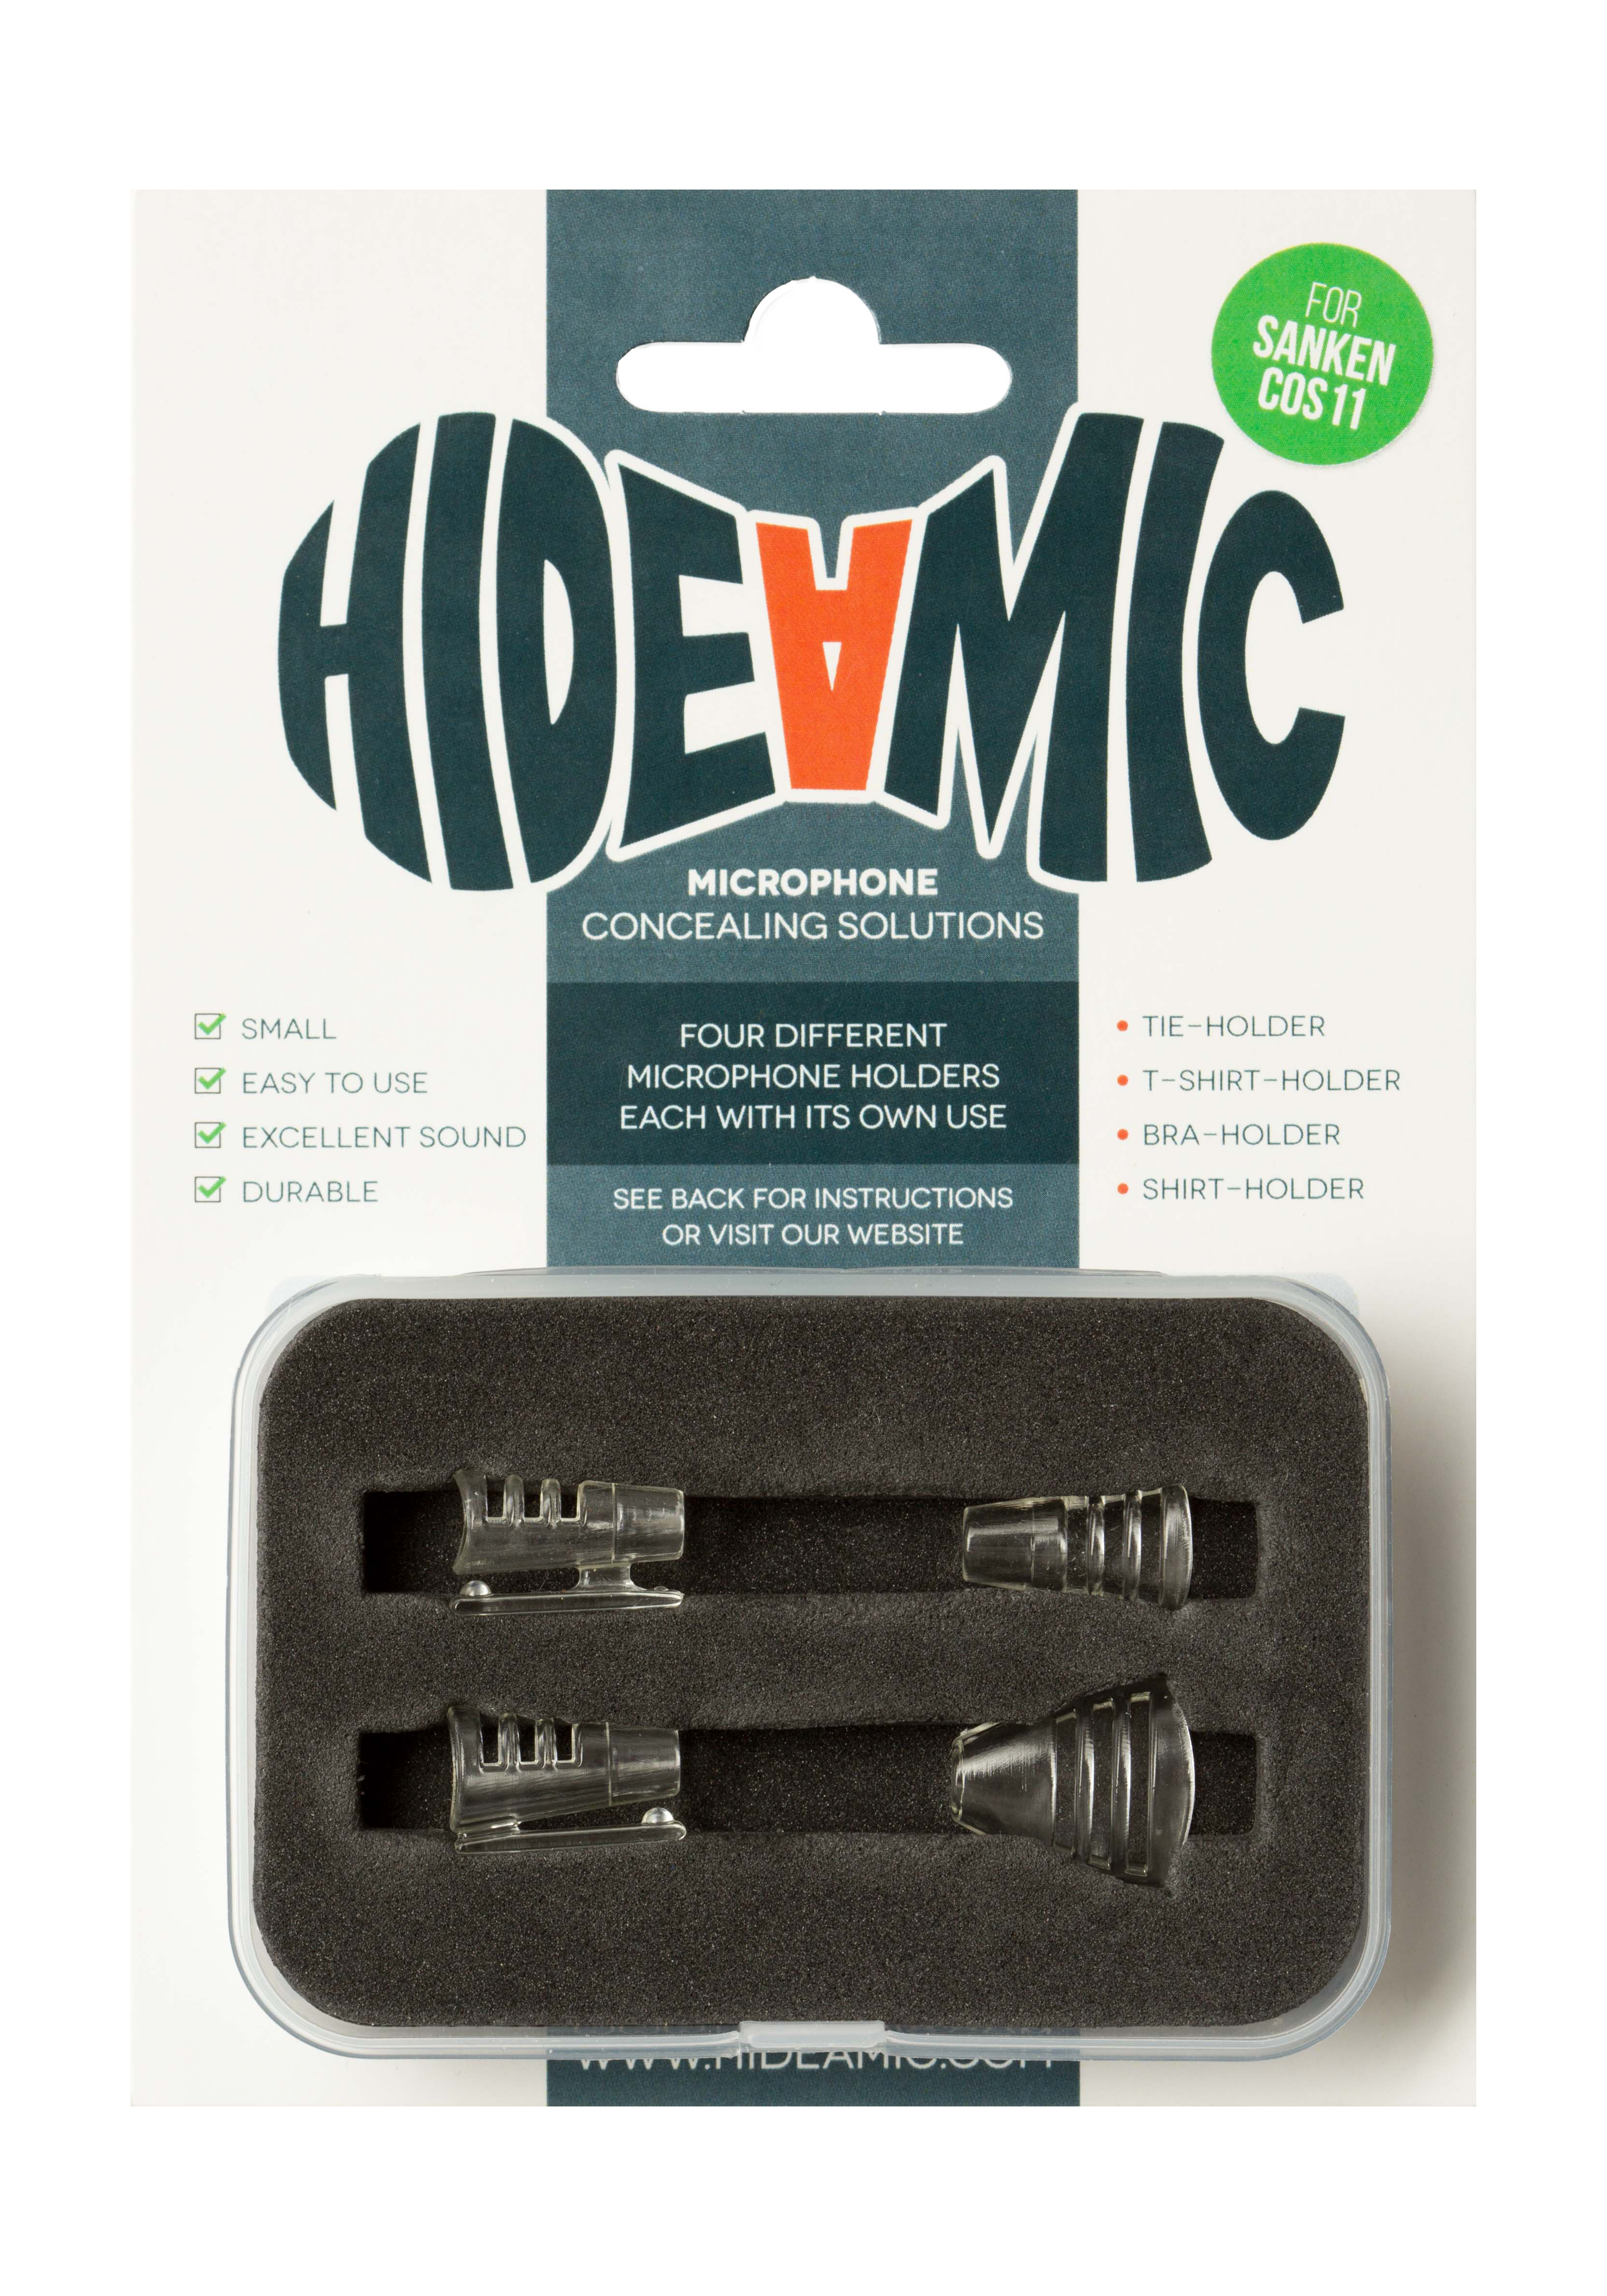 Hideamic Microphone Concealing Solutions